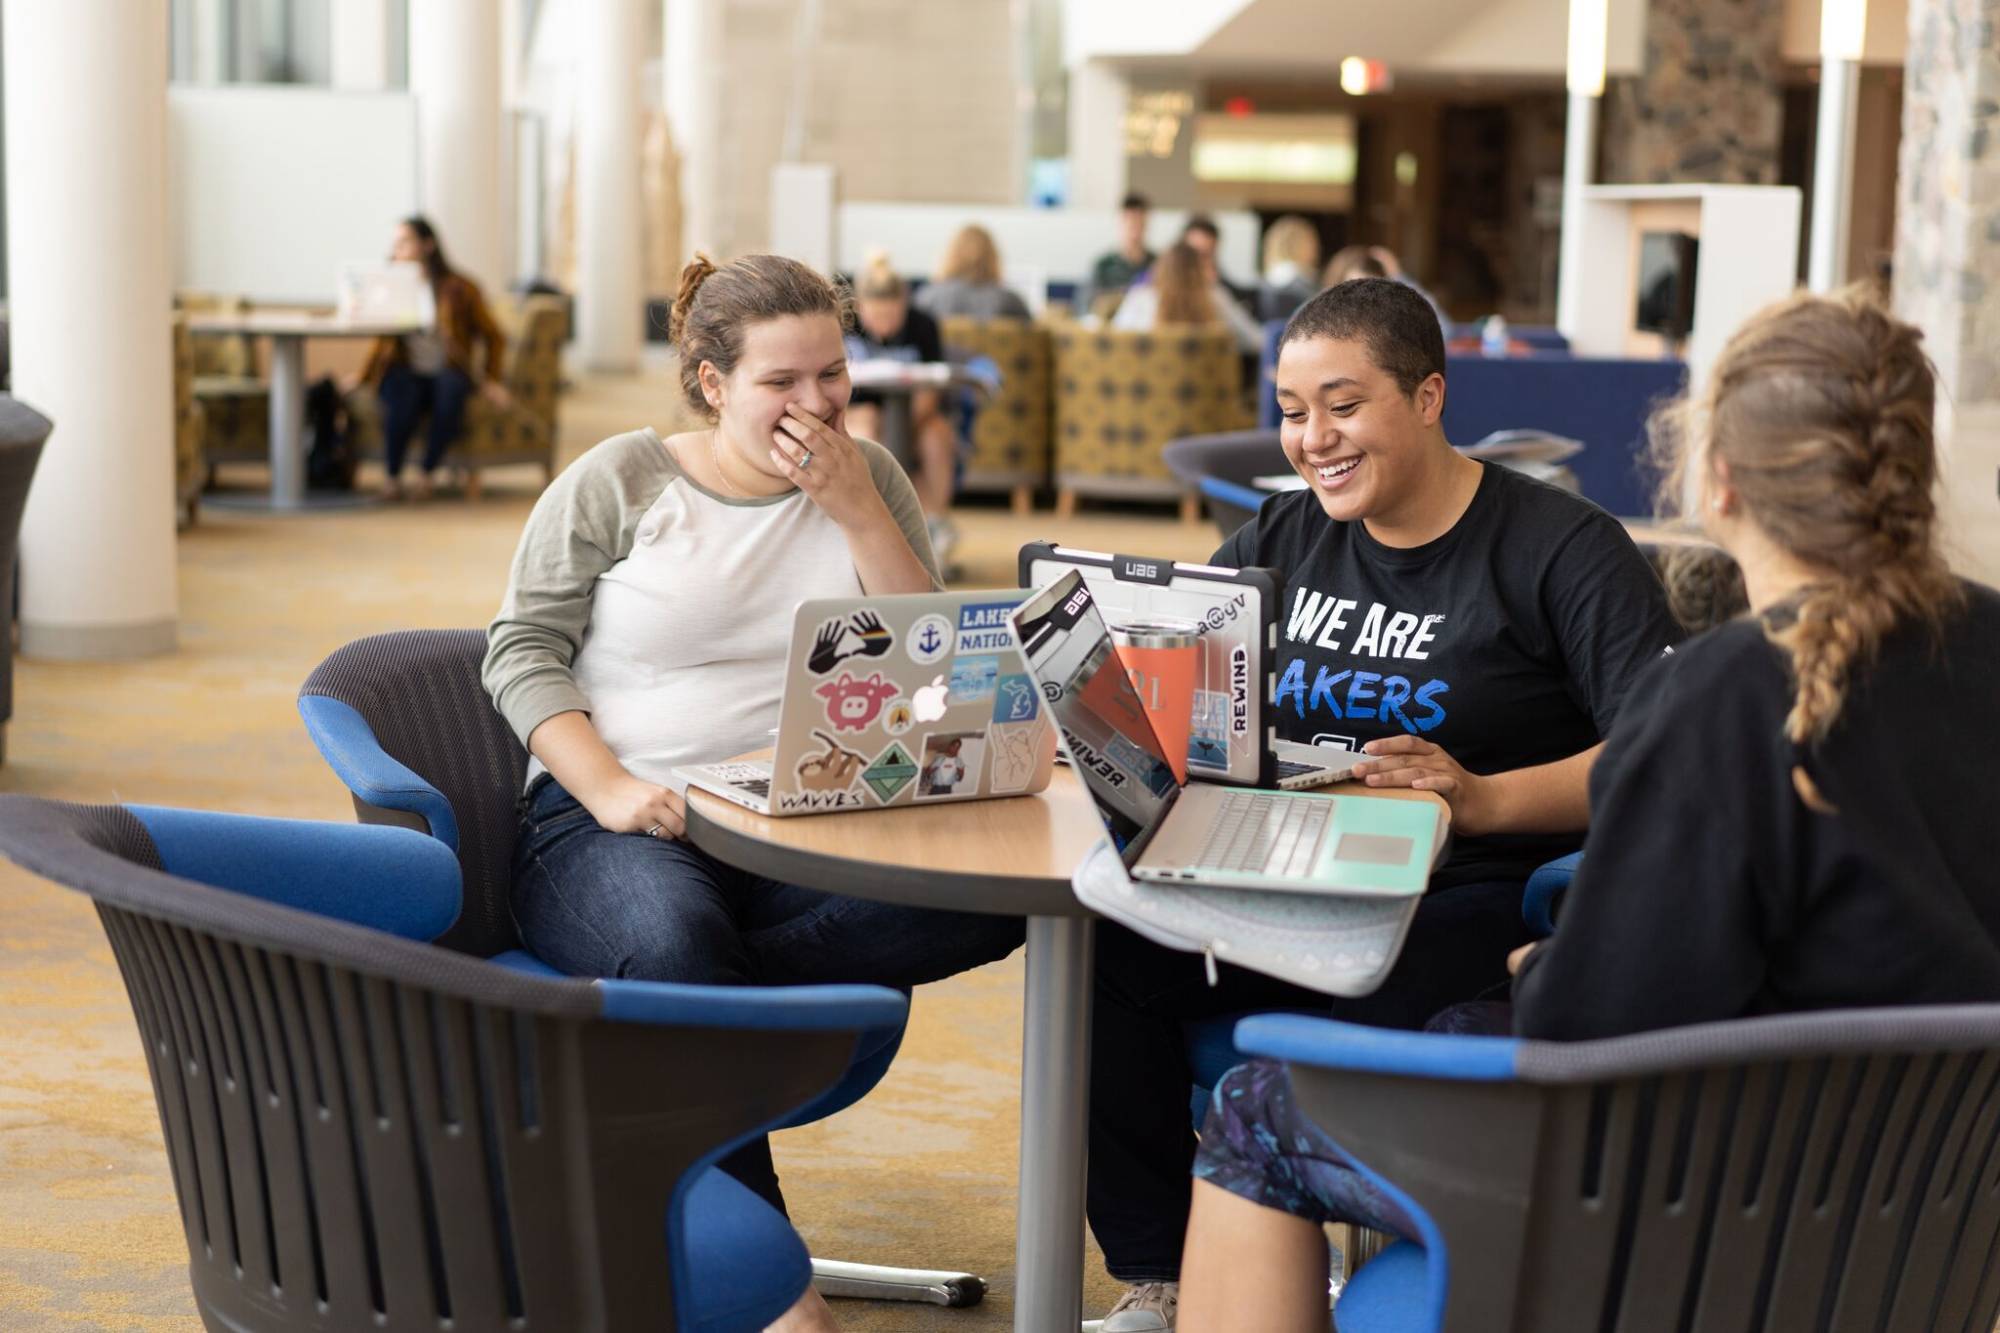 Students laughing and enjoying studying in the library